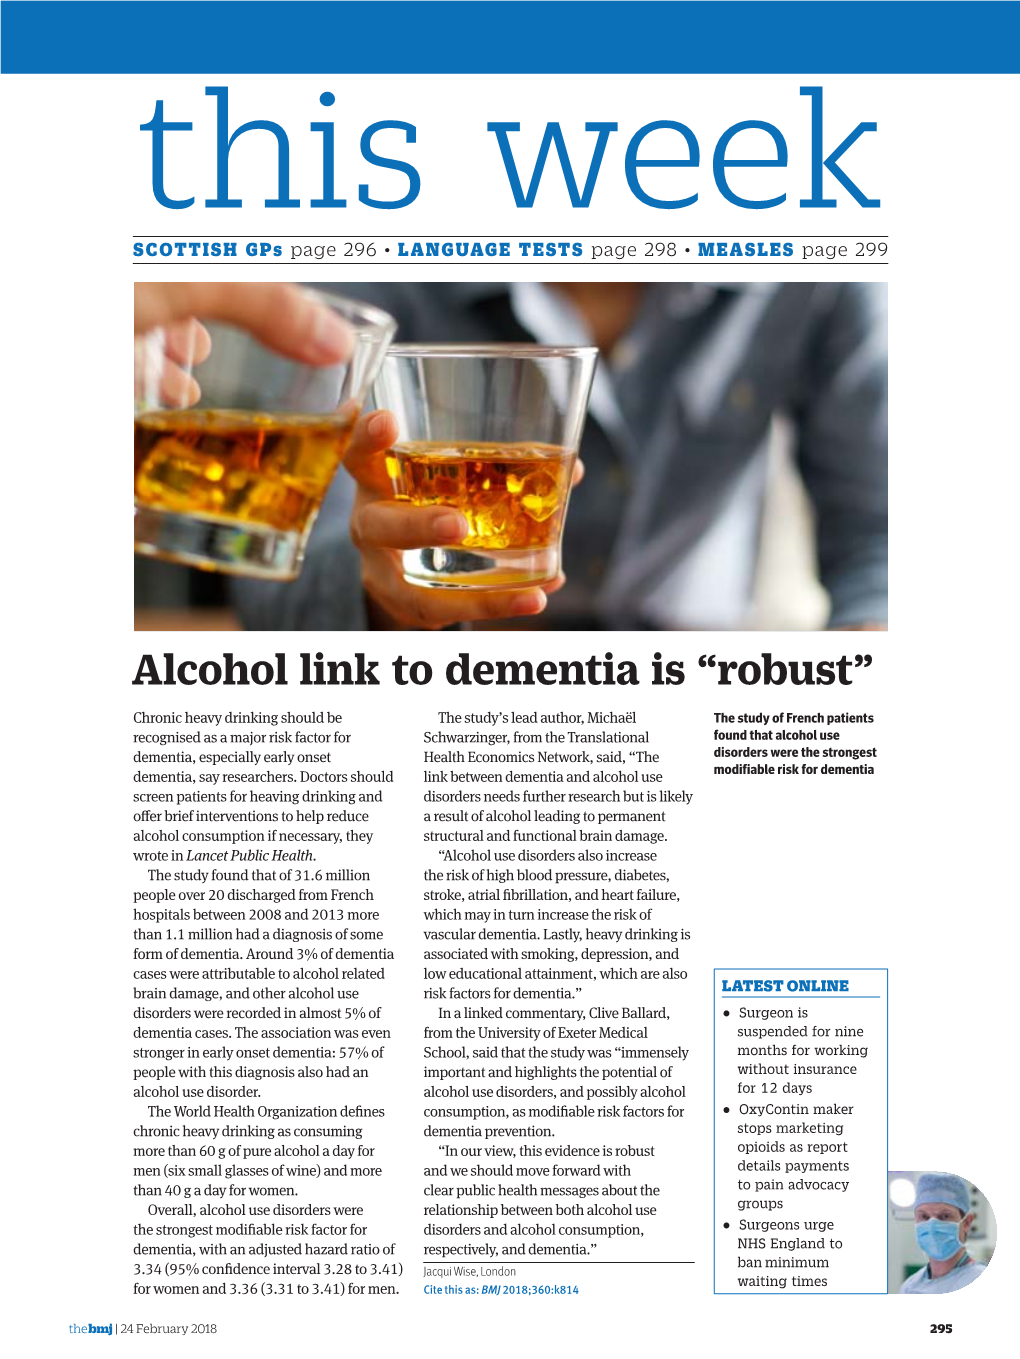 Alcohol Link to Dementia Is “Robust”